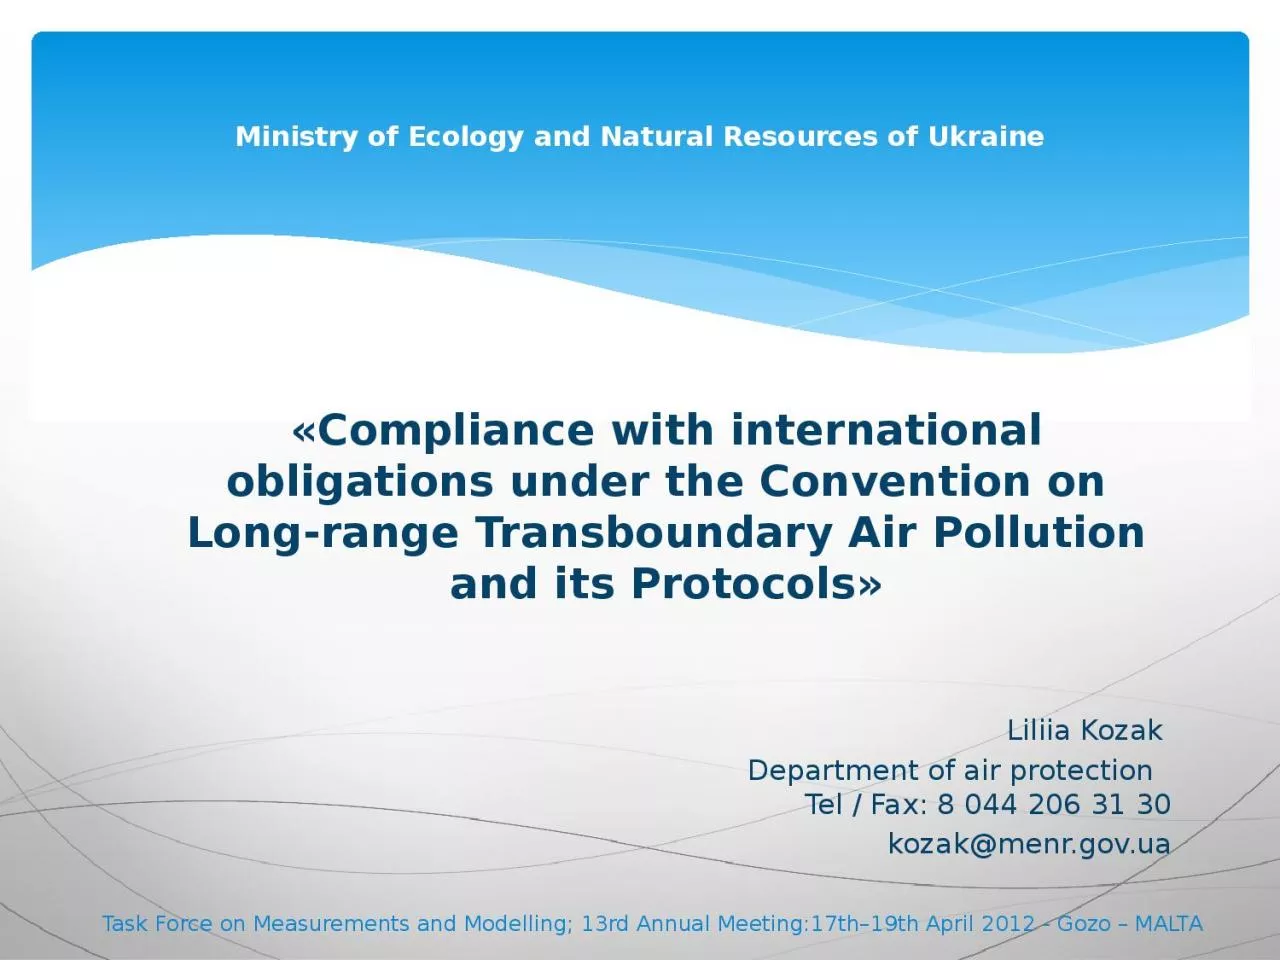 « Compliance with international obligations under the Convention on Long-range